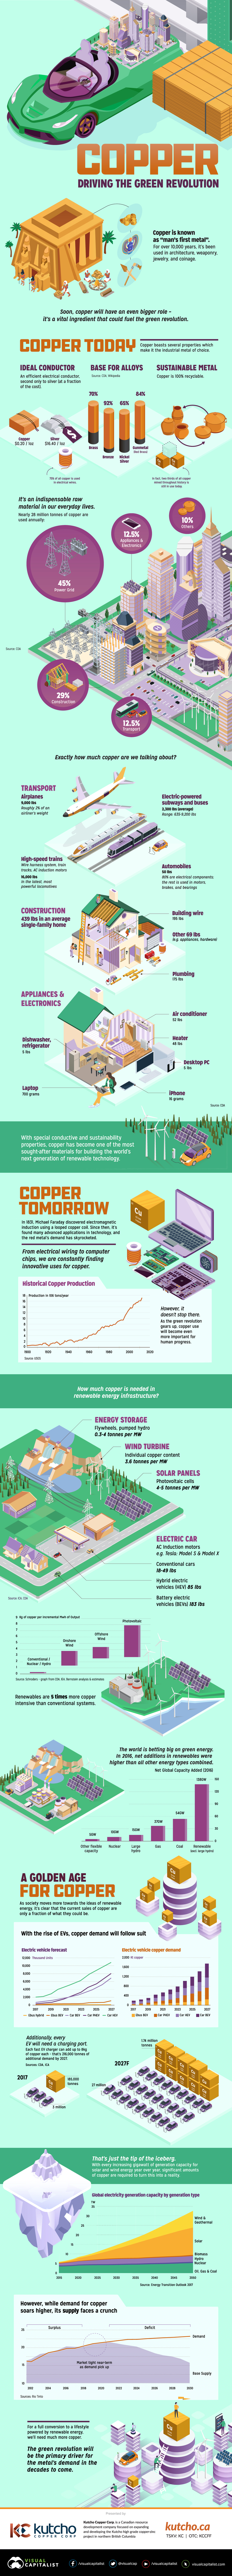 Copper: Driving the Green Energy Revolution